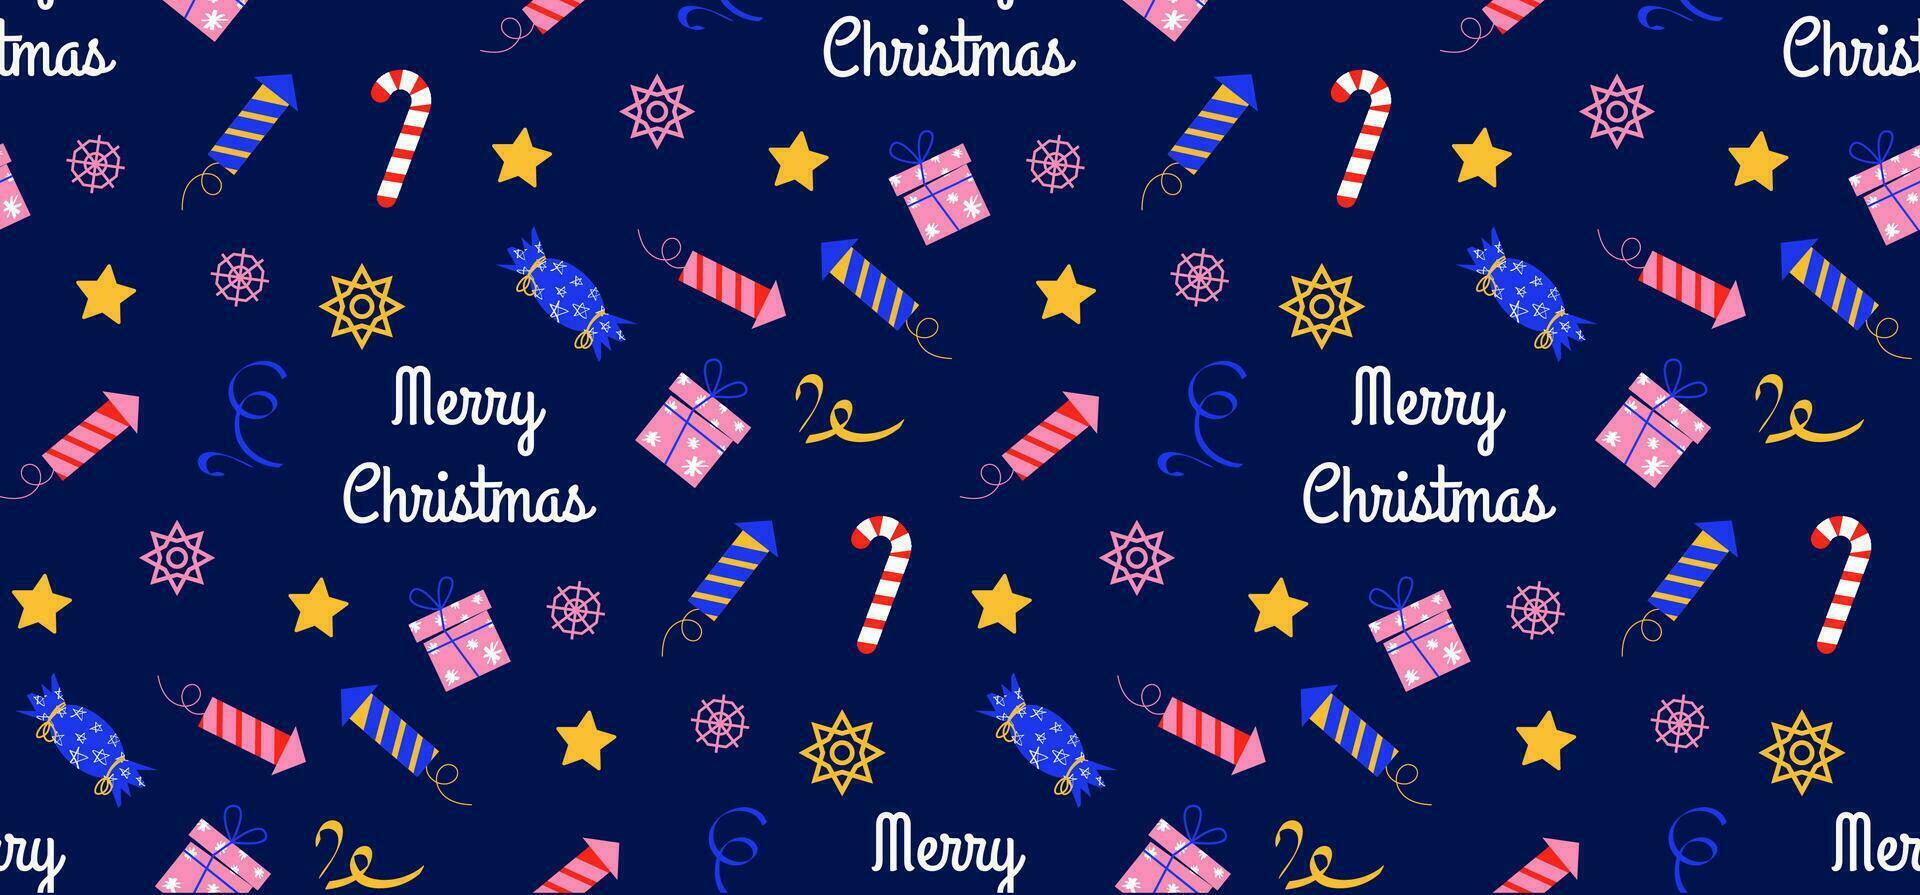 Christmas seamless background with text. Firecracker, candy cane, snowflakes, stars and other festive Christmas elements. Vector background in flat style. For printing on wrapping paper, textiles.